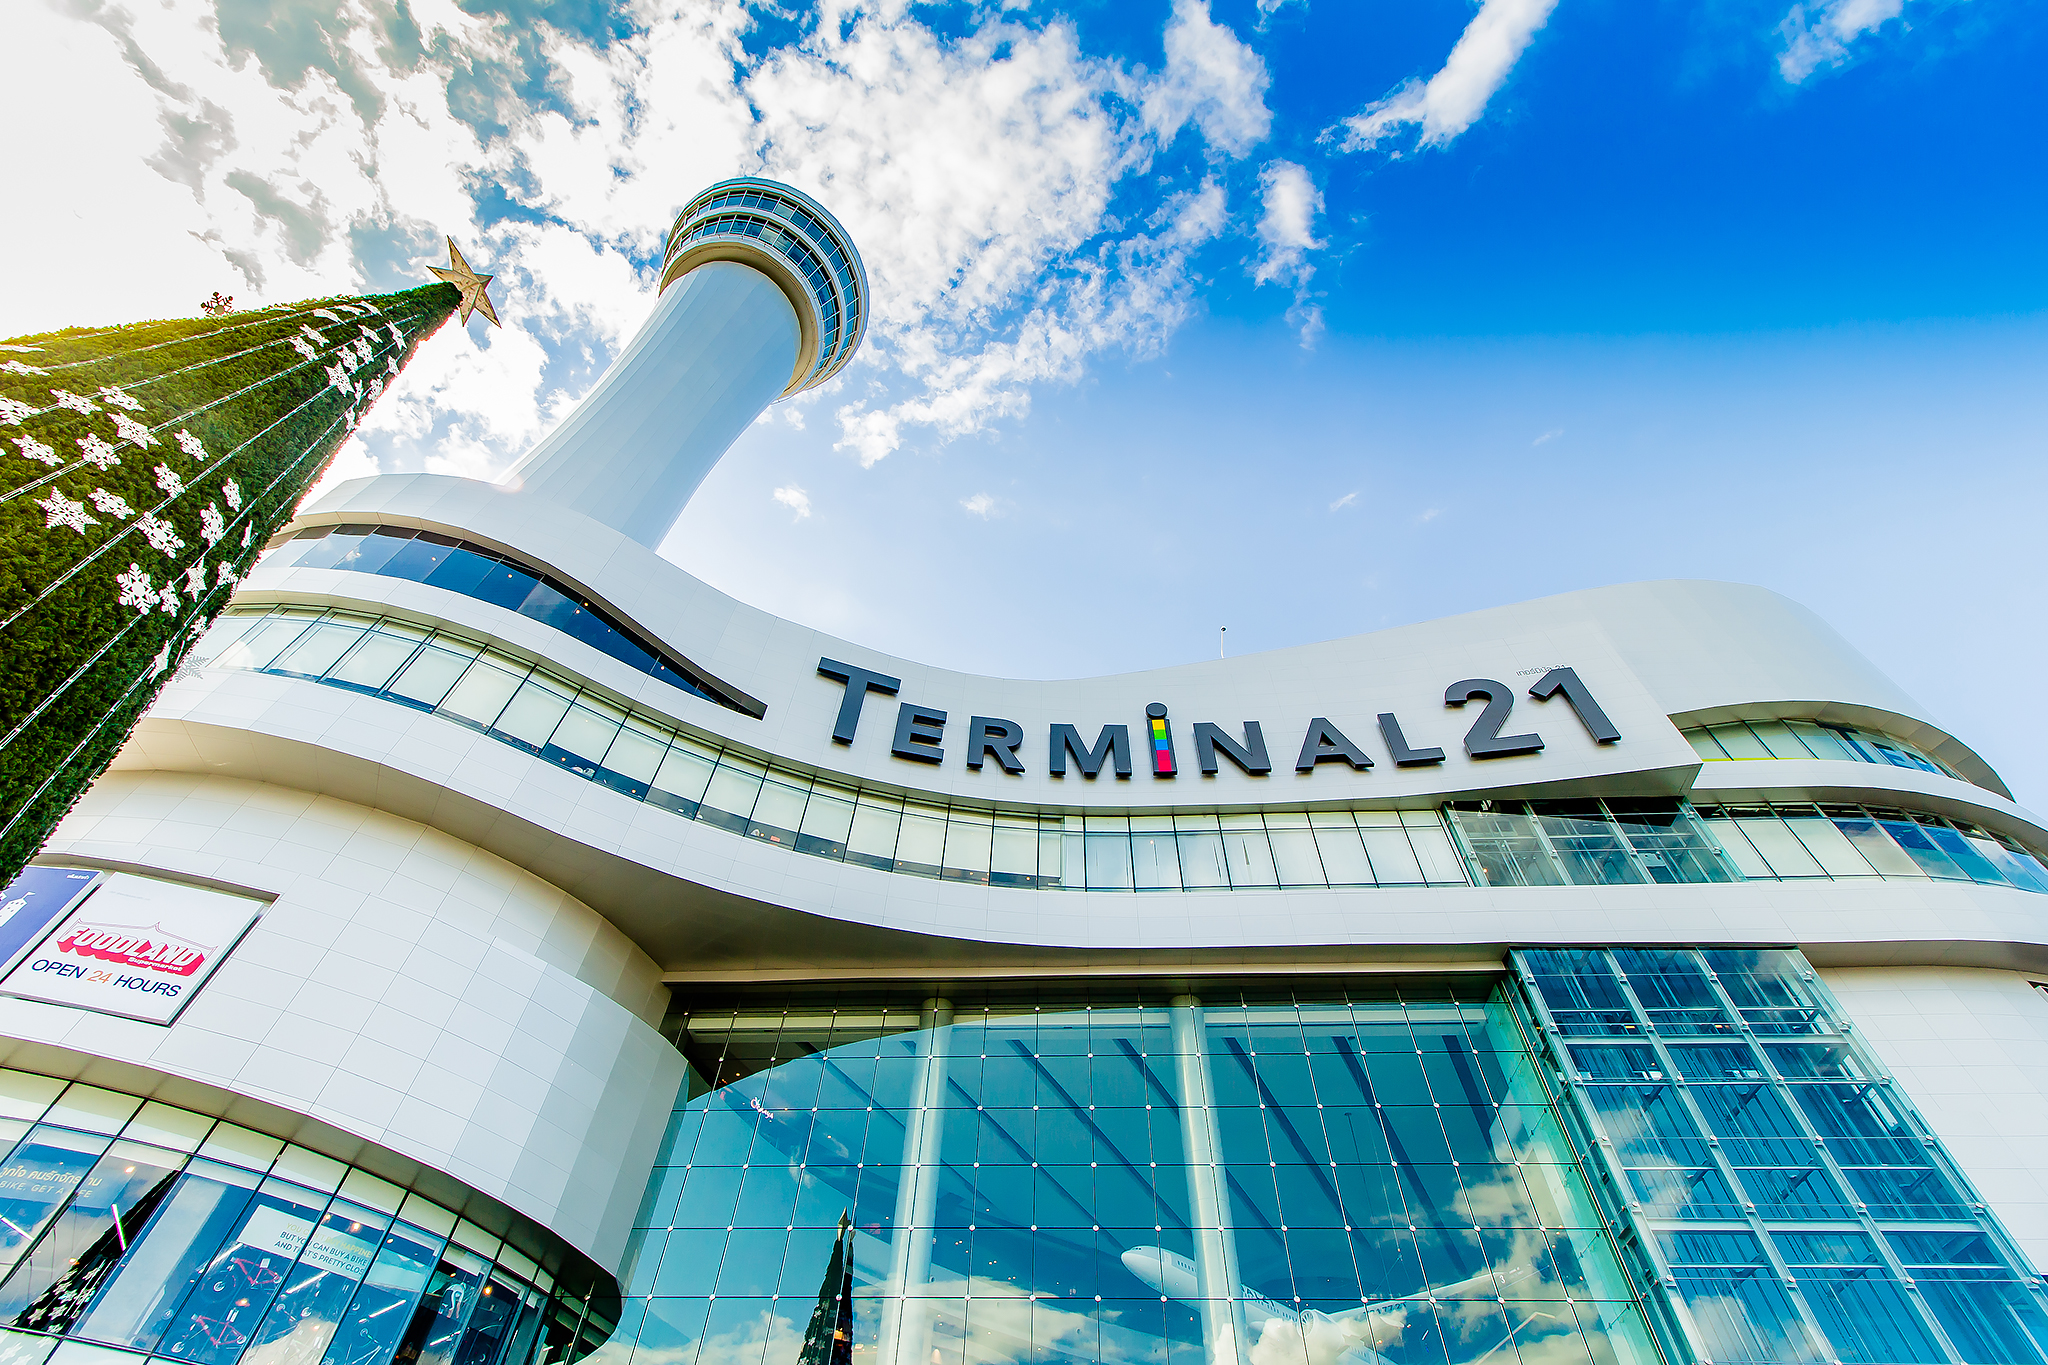 HARMAN Professional Solutions Helps Terminal 21 Korat Provide a World-Class Shopping Experience